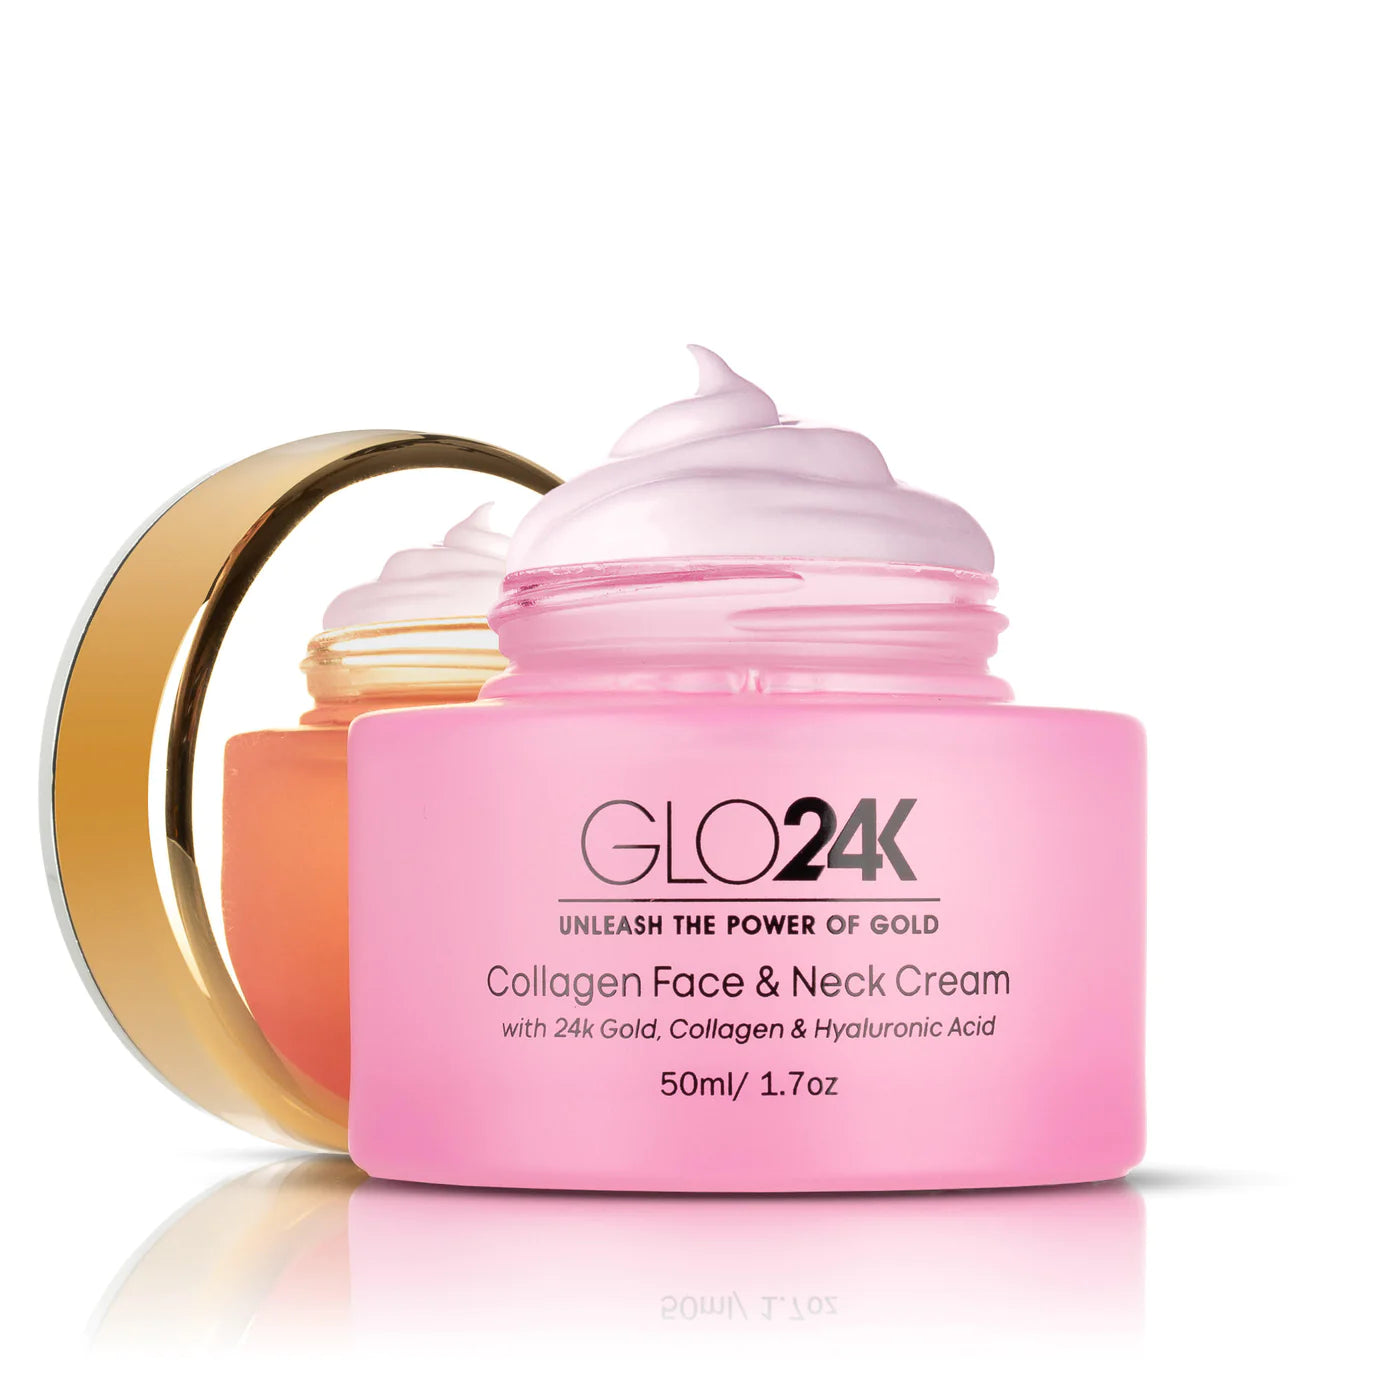 GLO24K Collagen Face & Neck Cream, lid open and displaying product